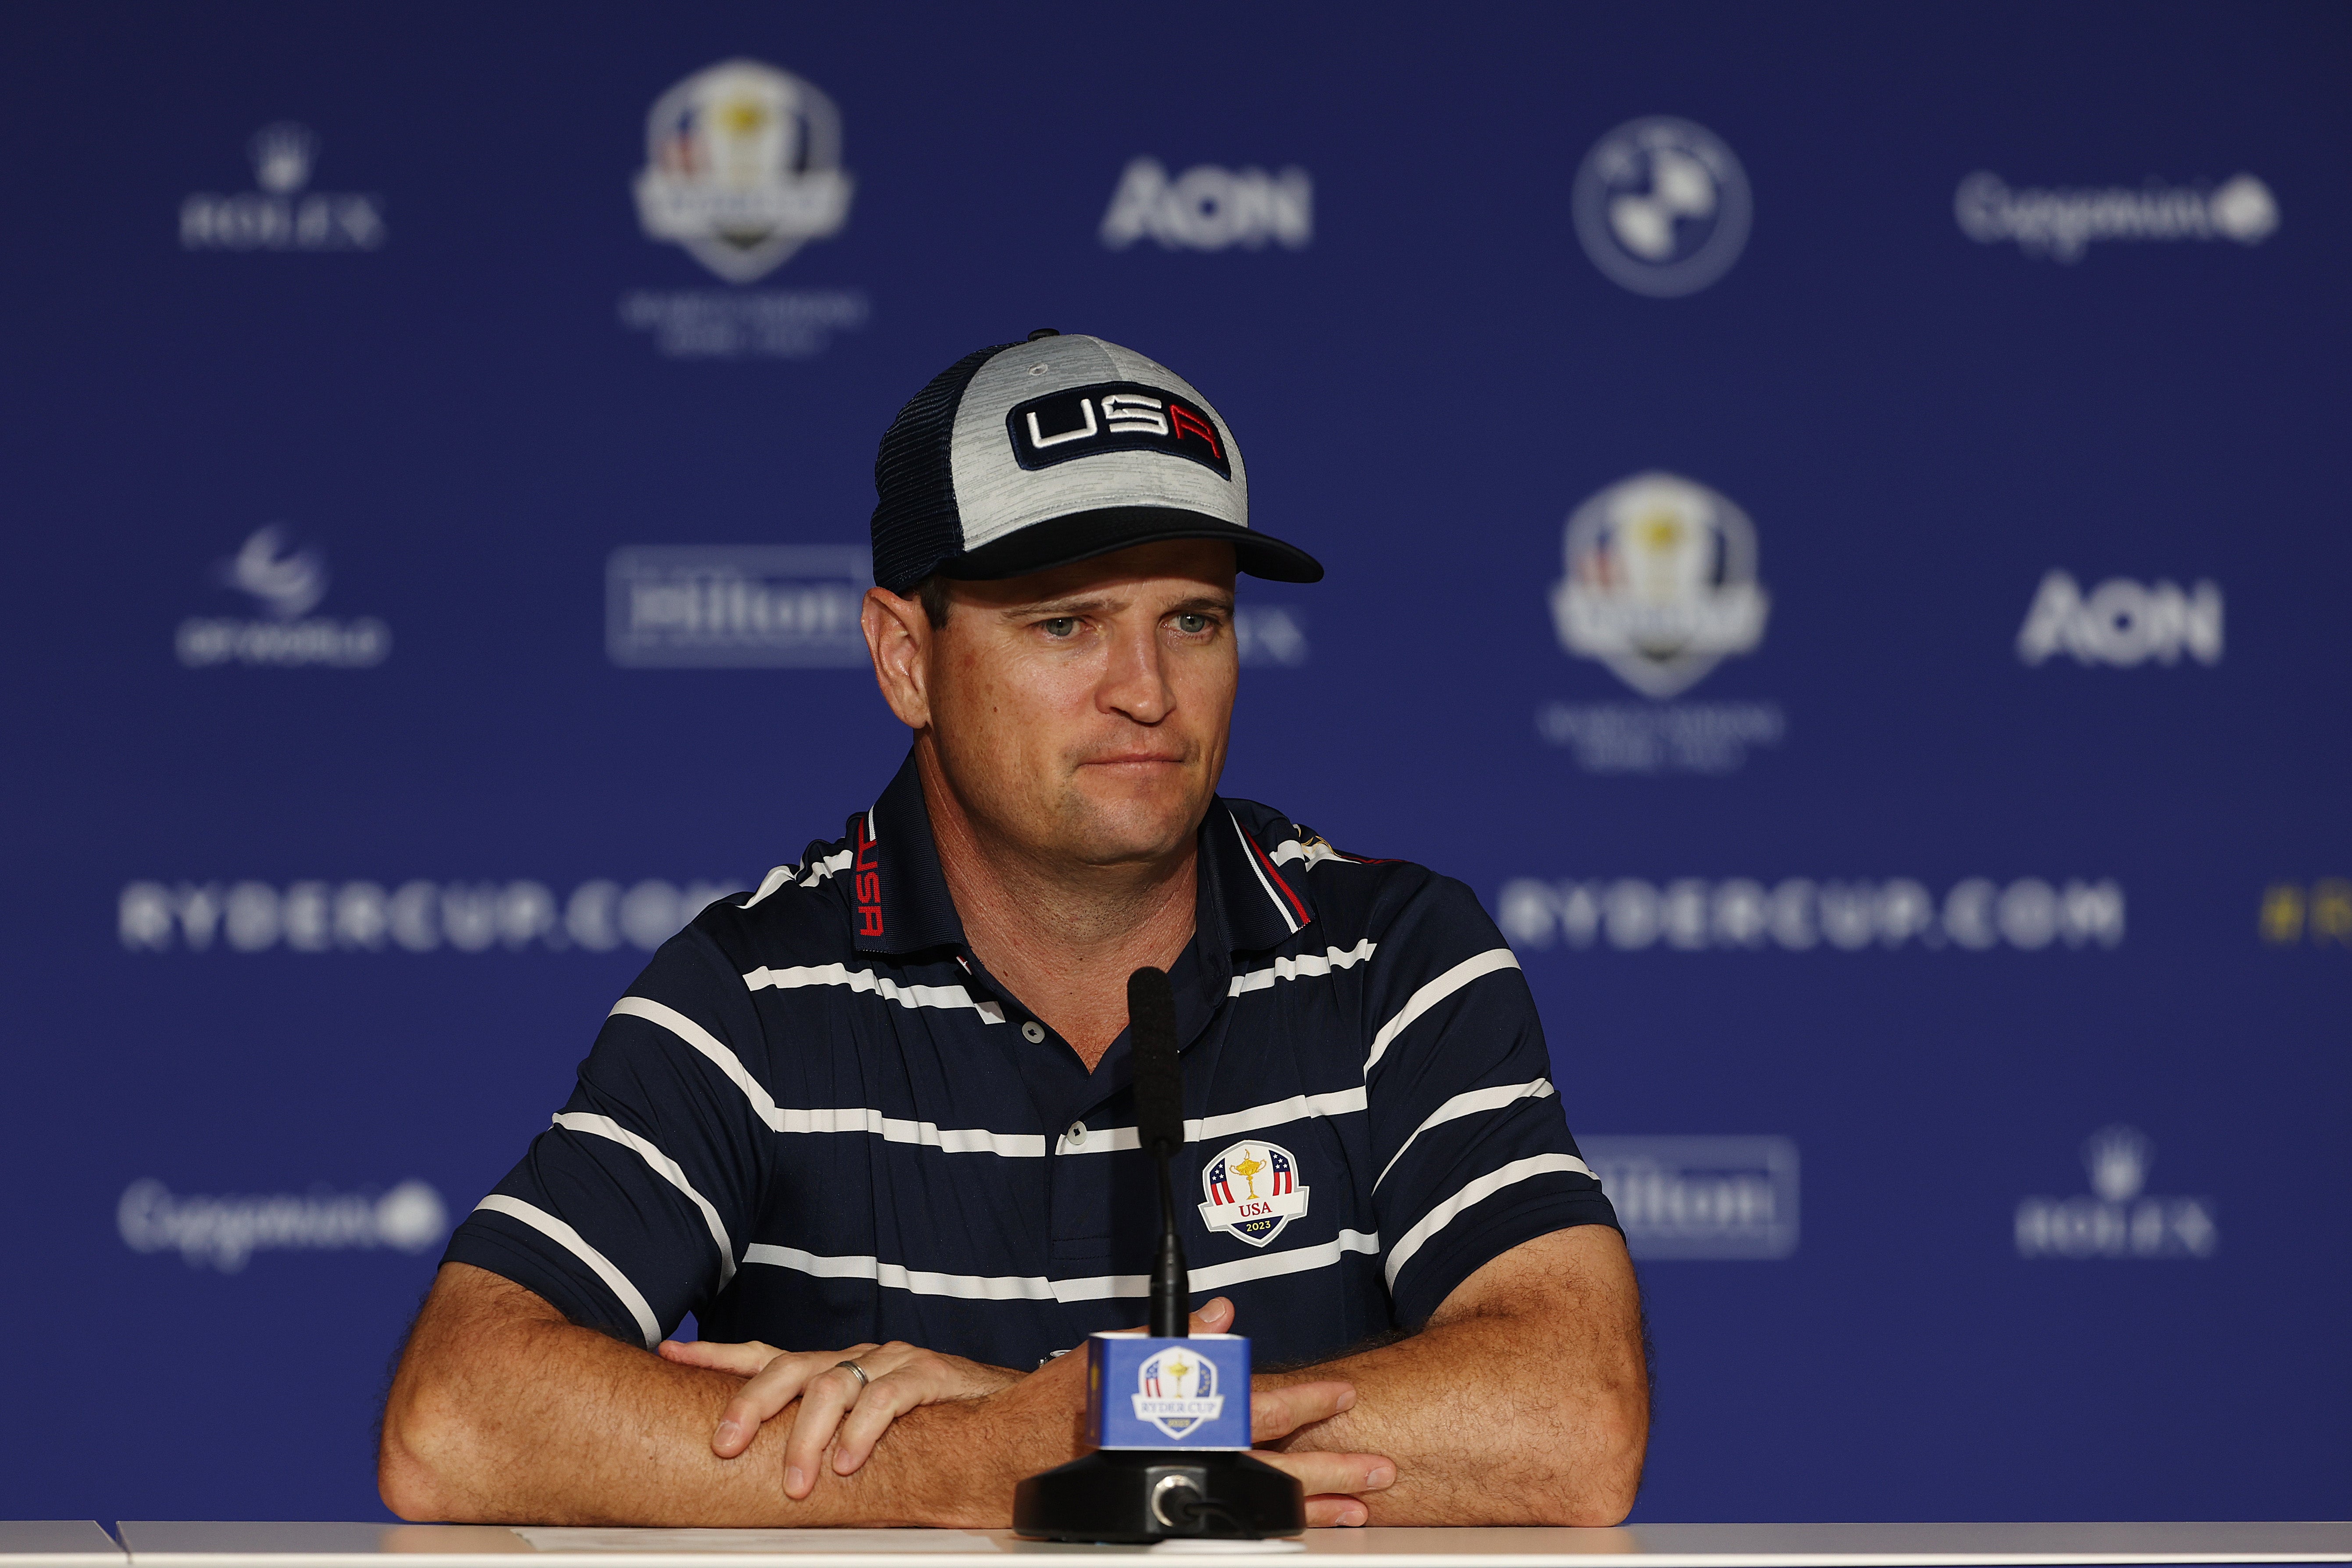 Zach Johnson speaks to the media after day one in Rome